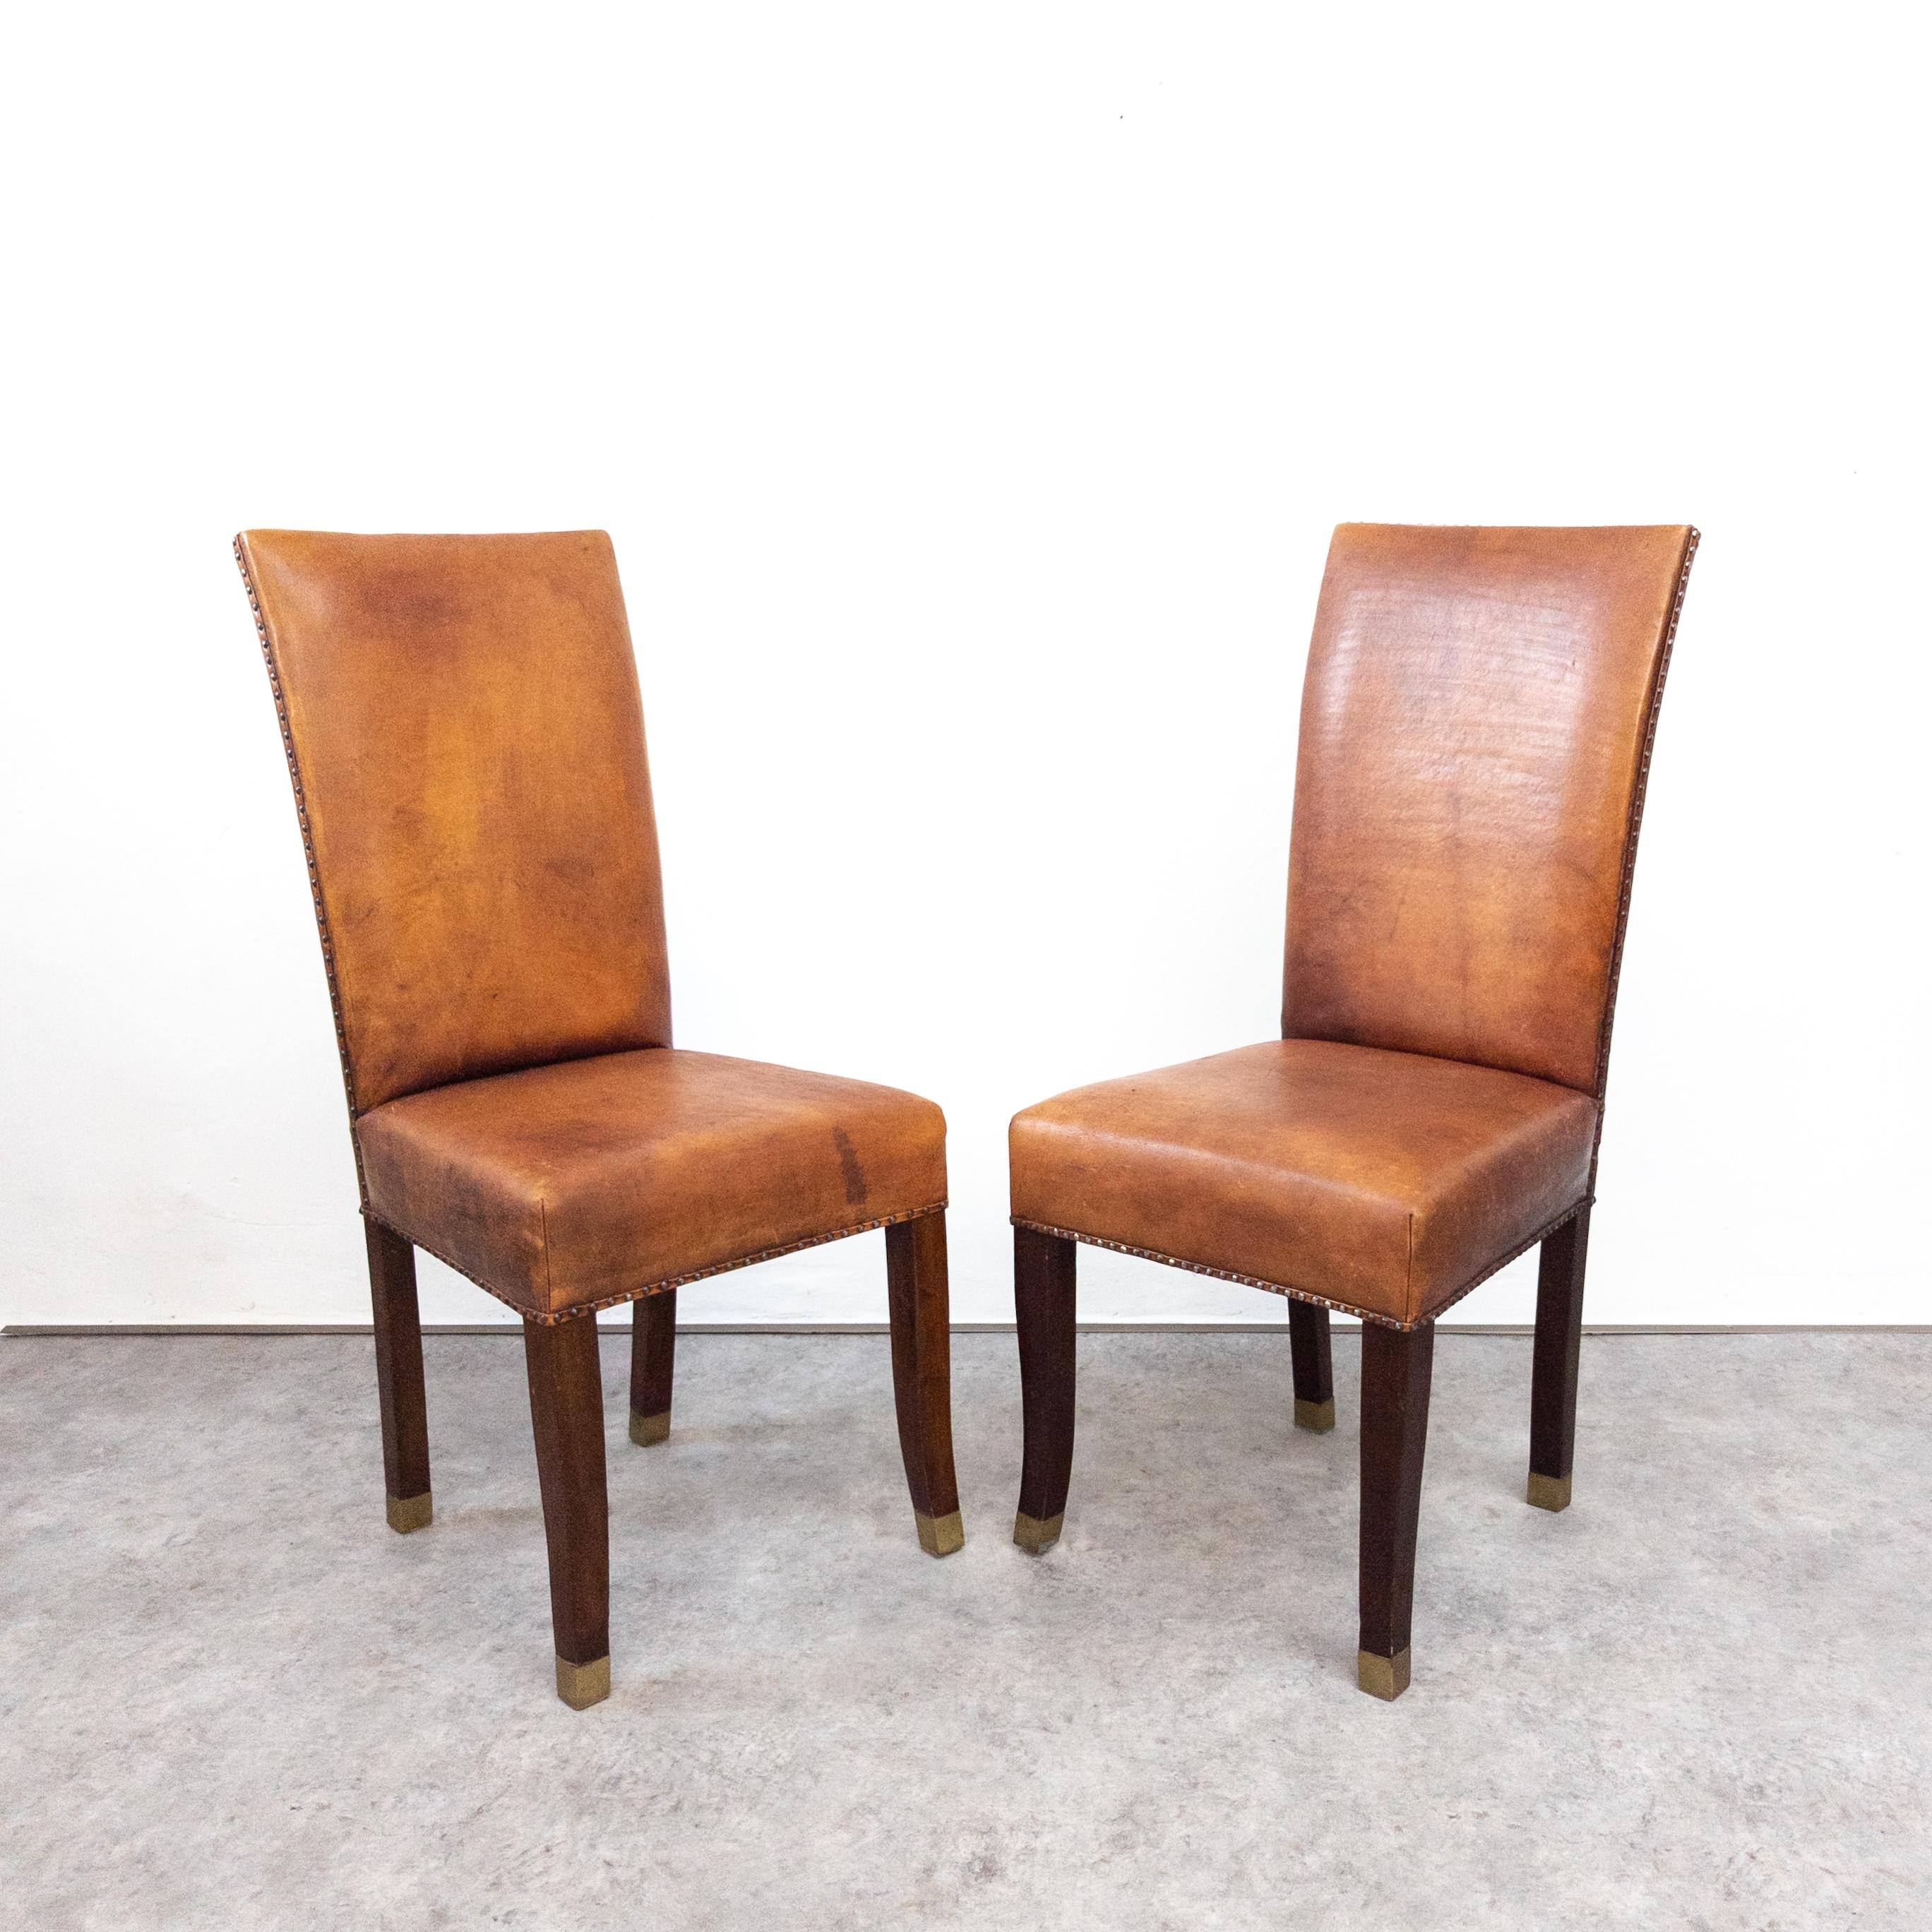 Mid-20th Century French Art Deco Oak and Leather High Back Chairs